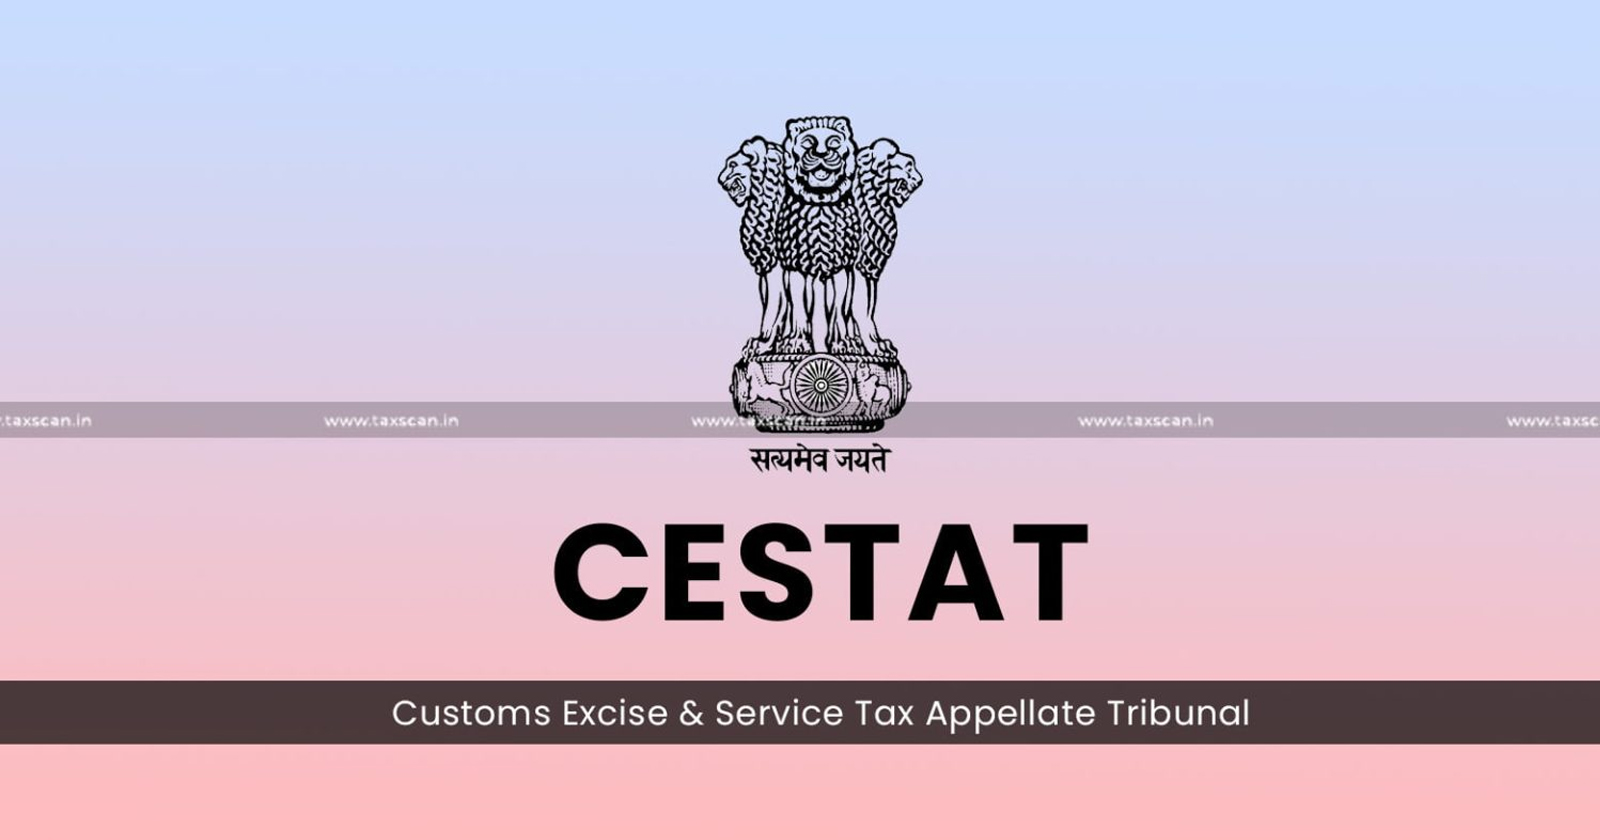 Services provided to Universities in foreign Countries as Export of Services cannot be Treated as ‘Intermediaries’ u/r Rule 2(f) of Place of Provision of Service Rules: CESTAT